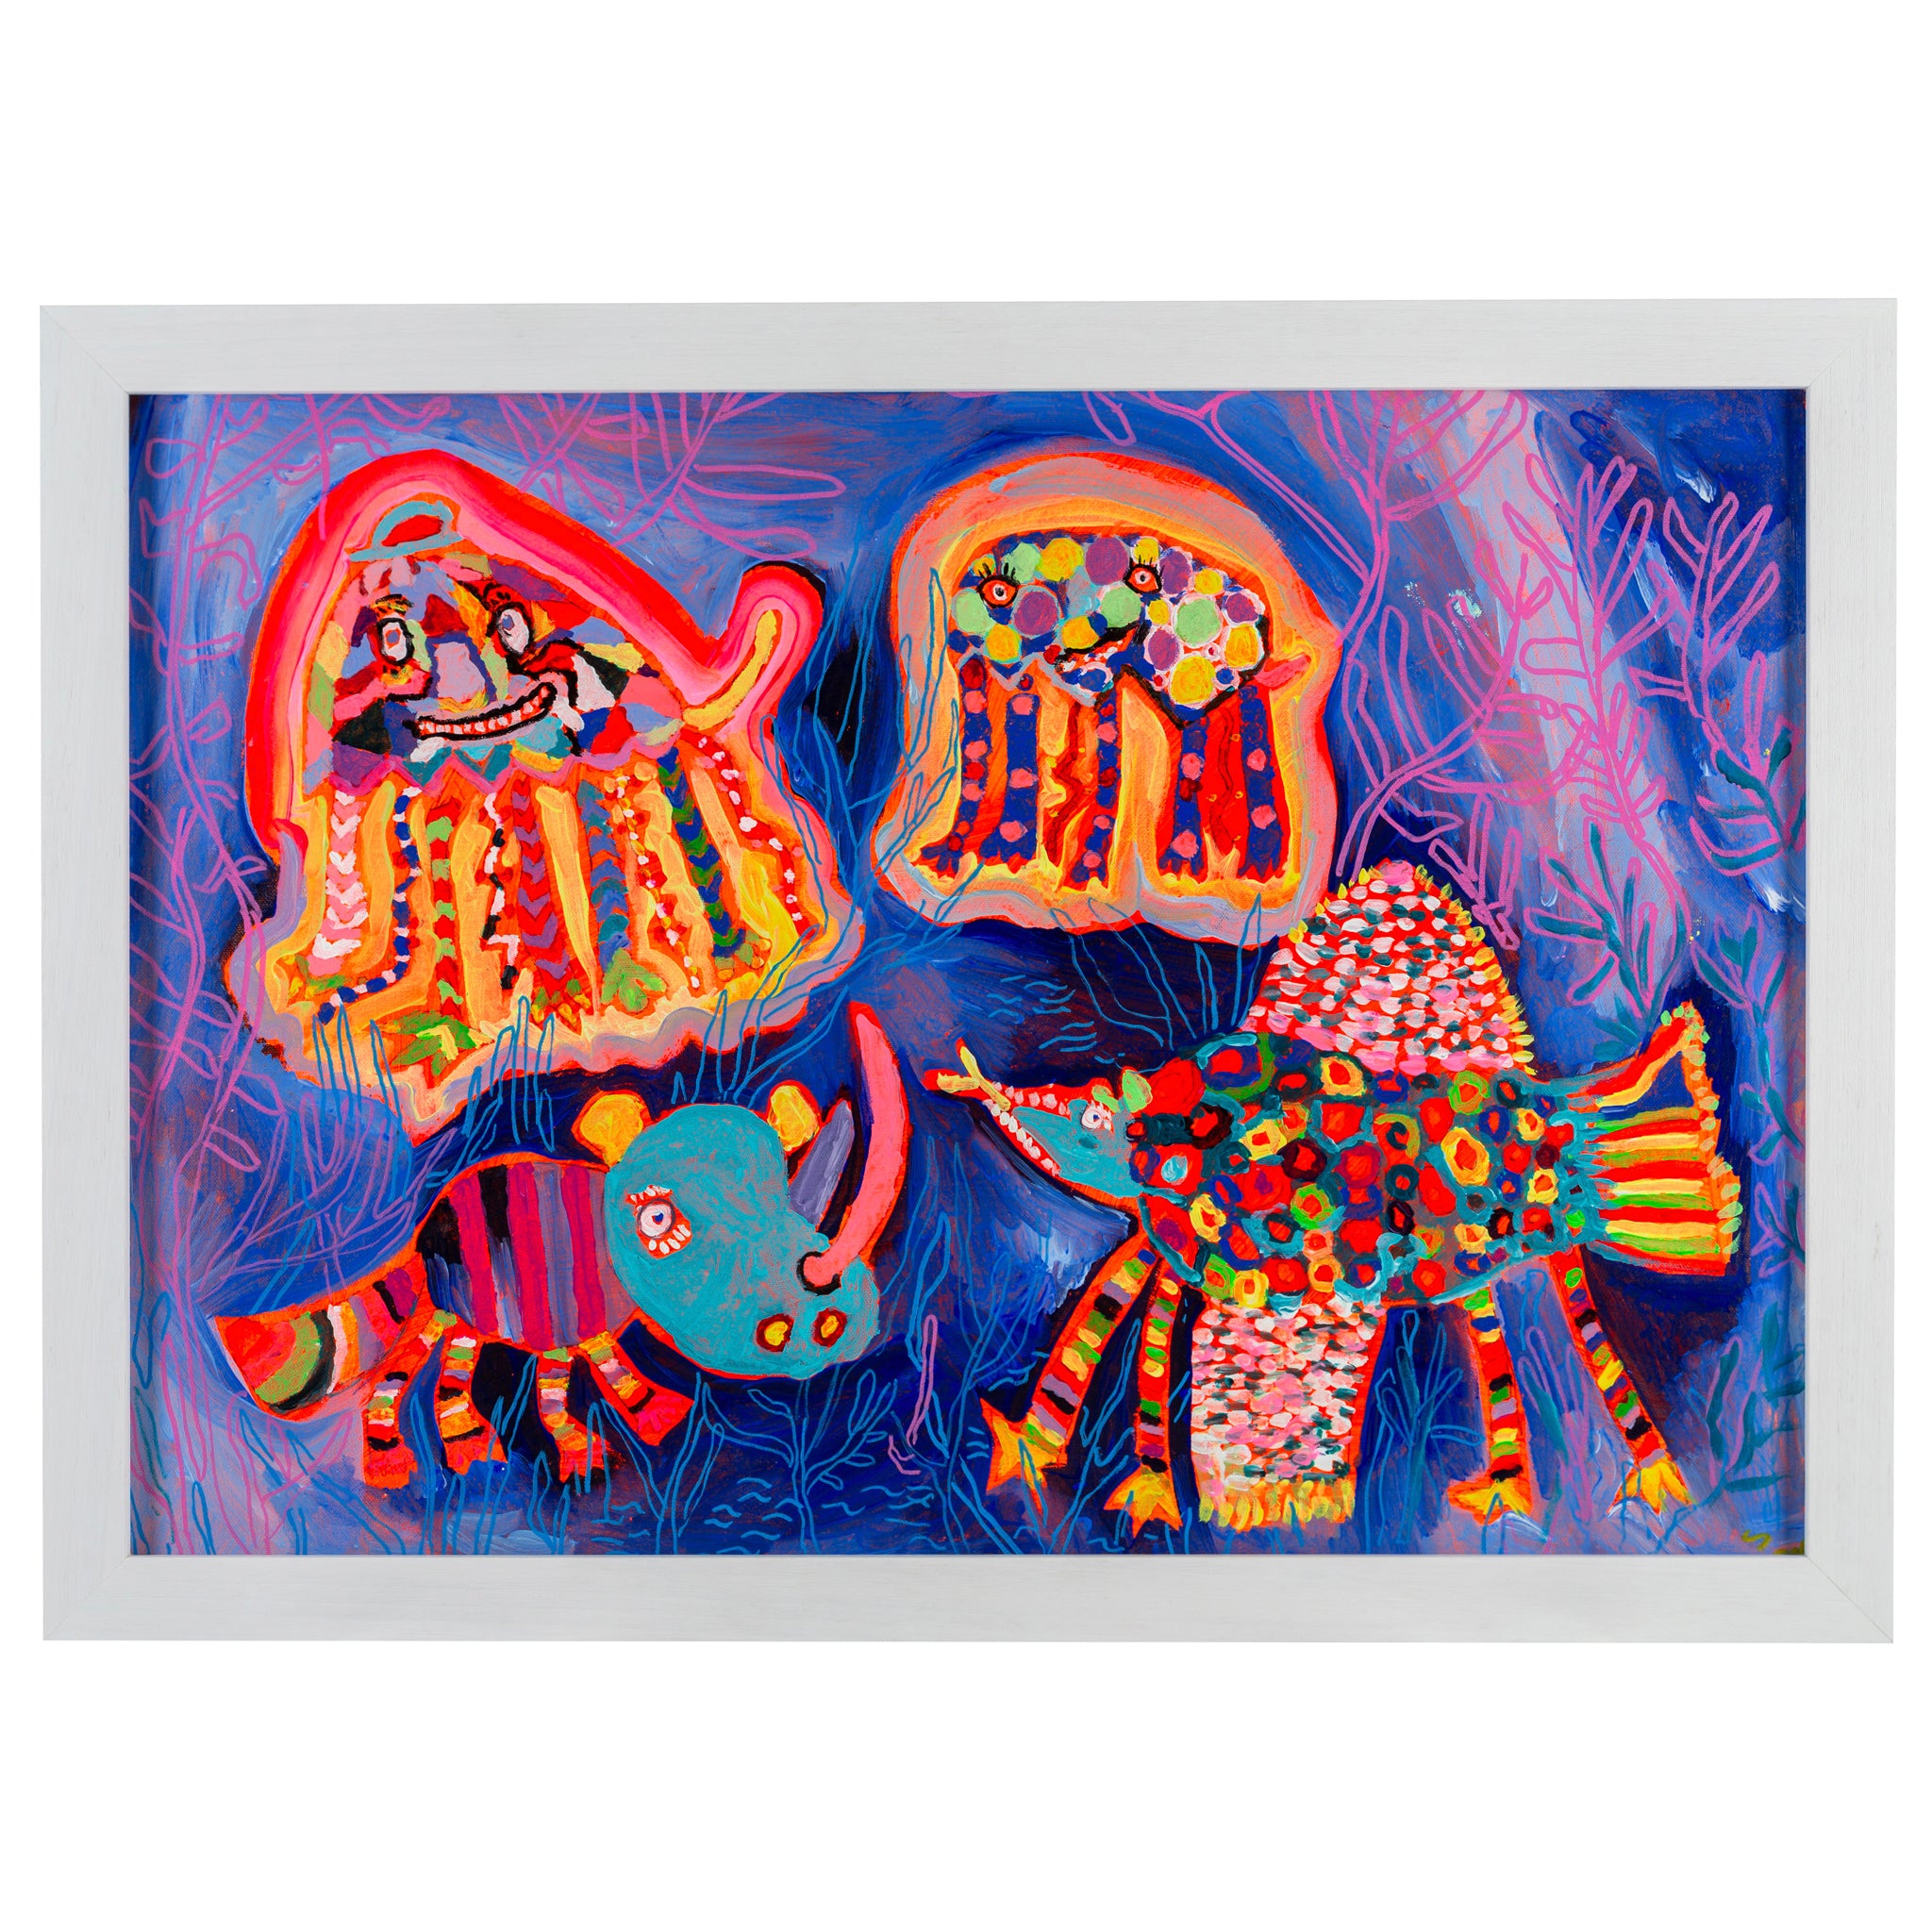 Bright coloured hand painted strange animal design called Jelly Hippo Crock-a-doo